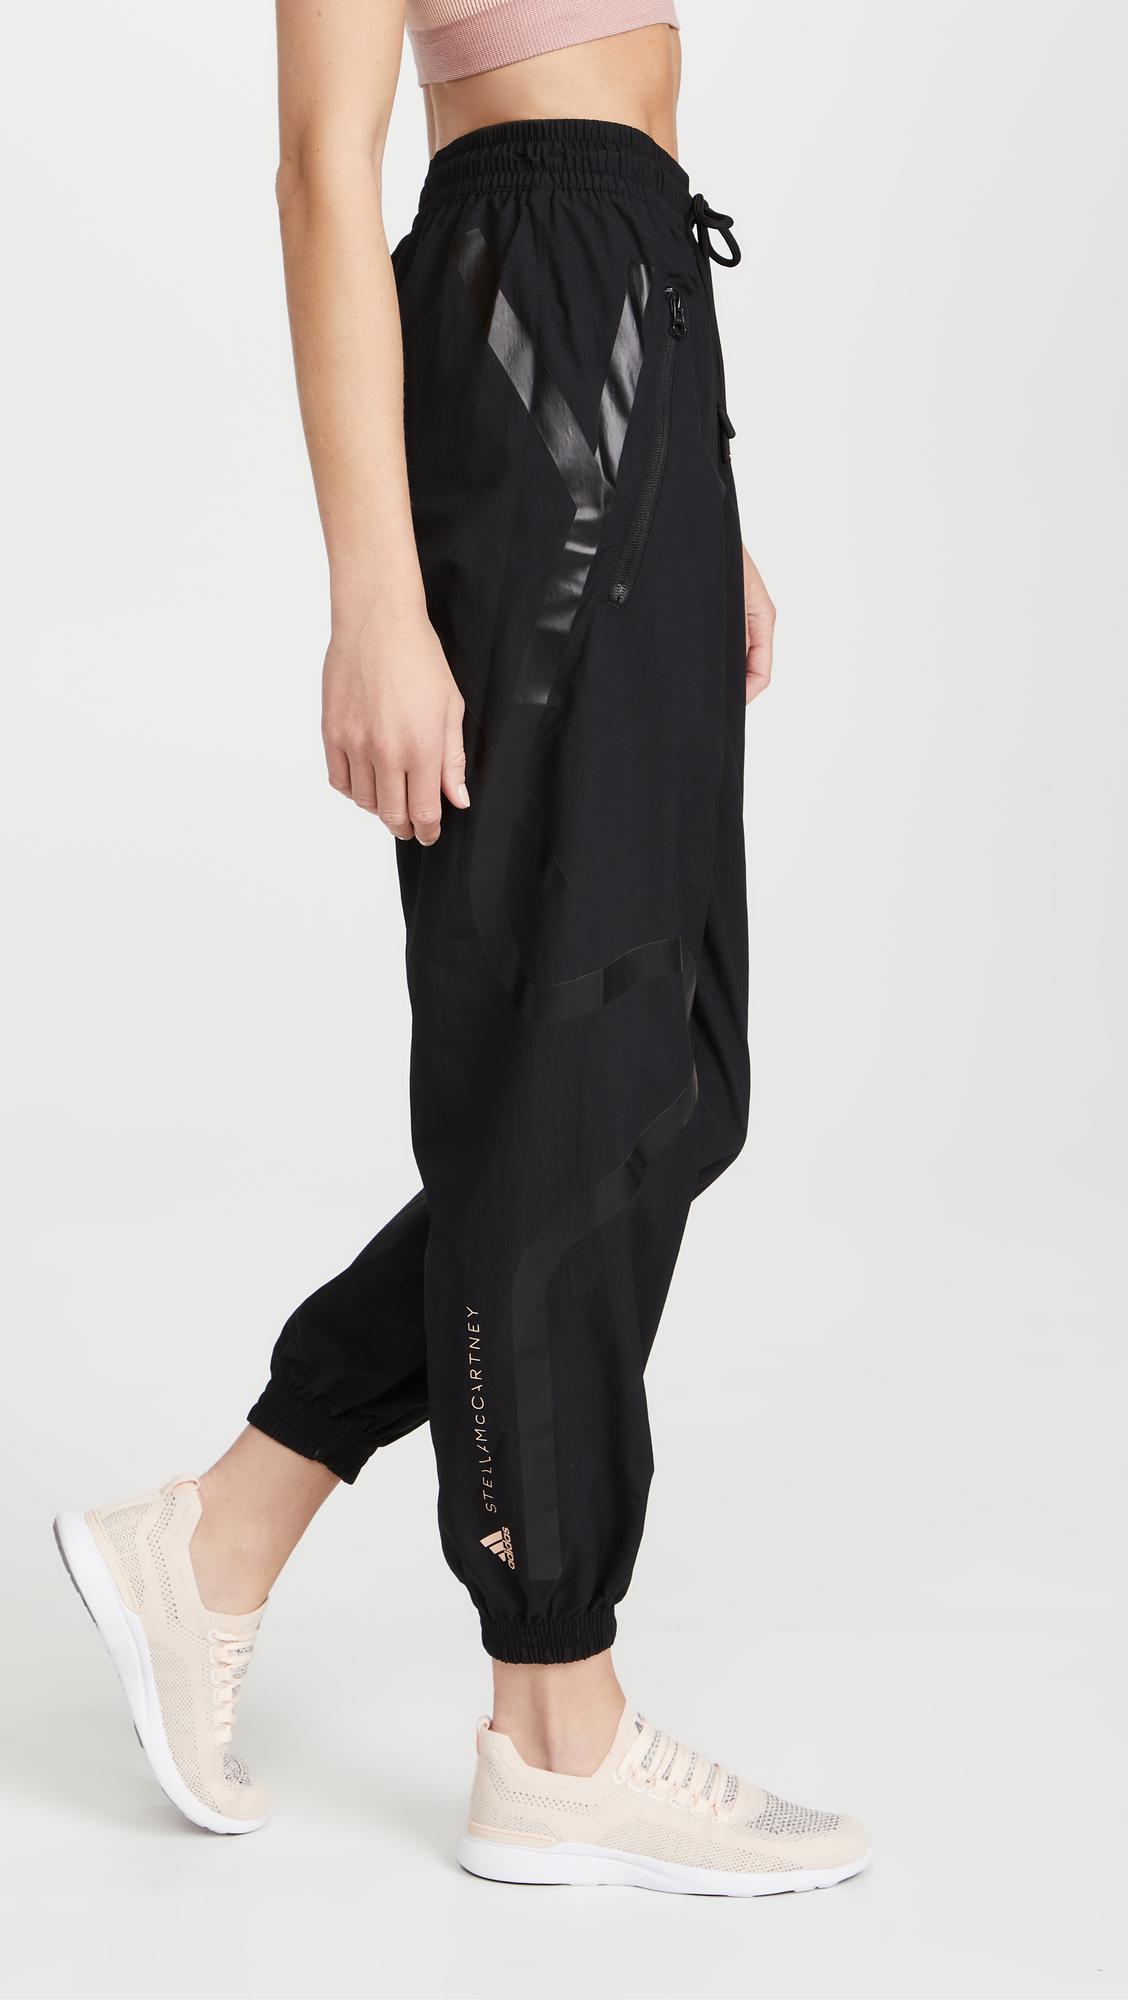 adidas By Stella McCartney Synthetic Asmc Woven Track Pants in Black | Lyst